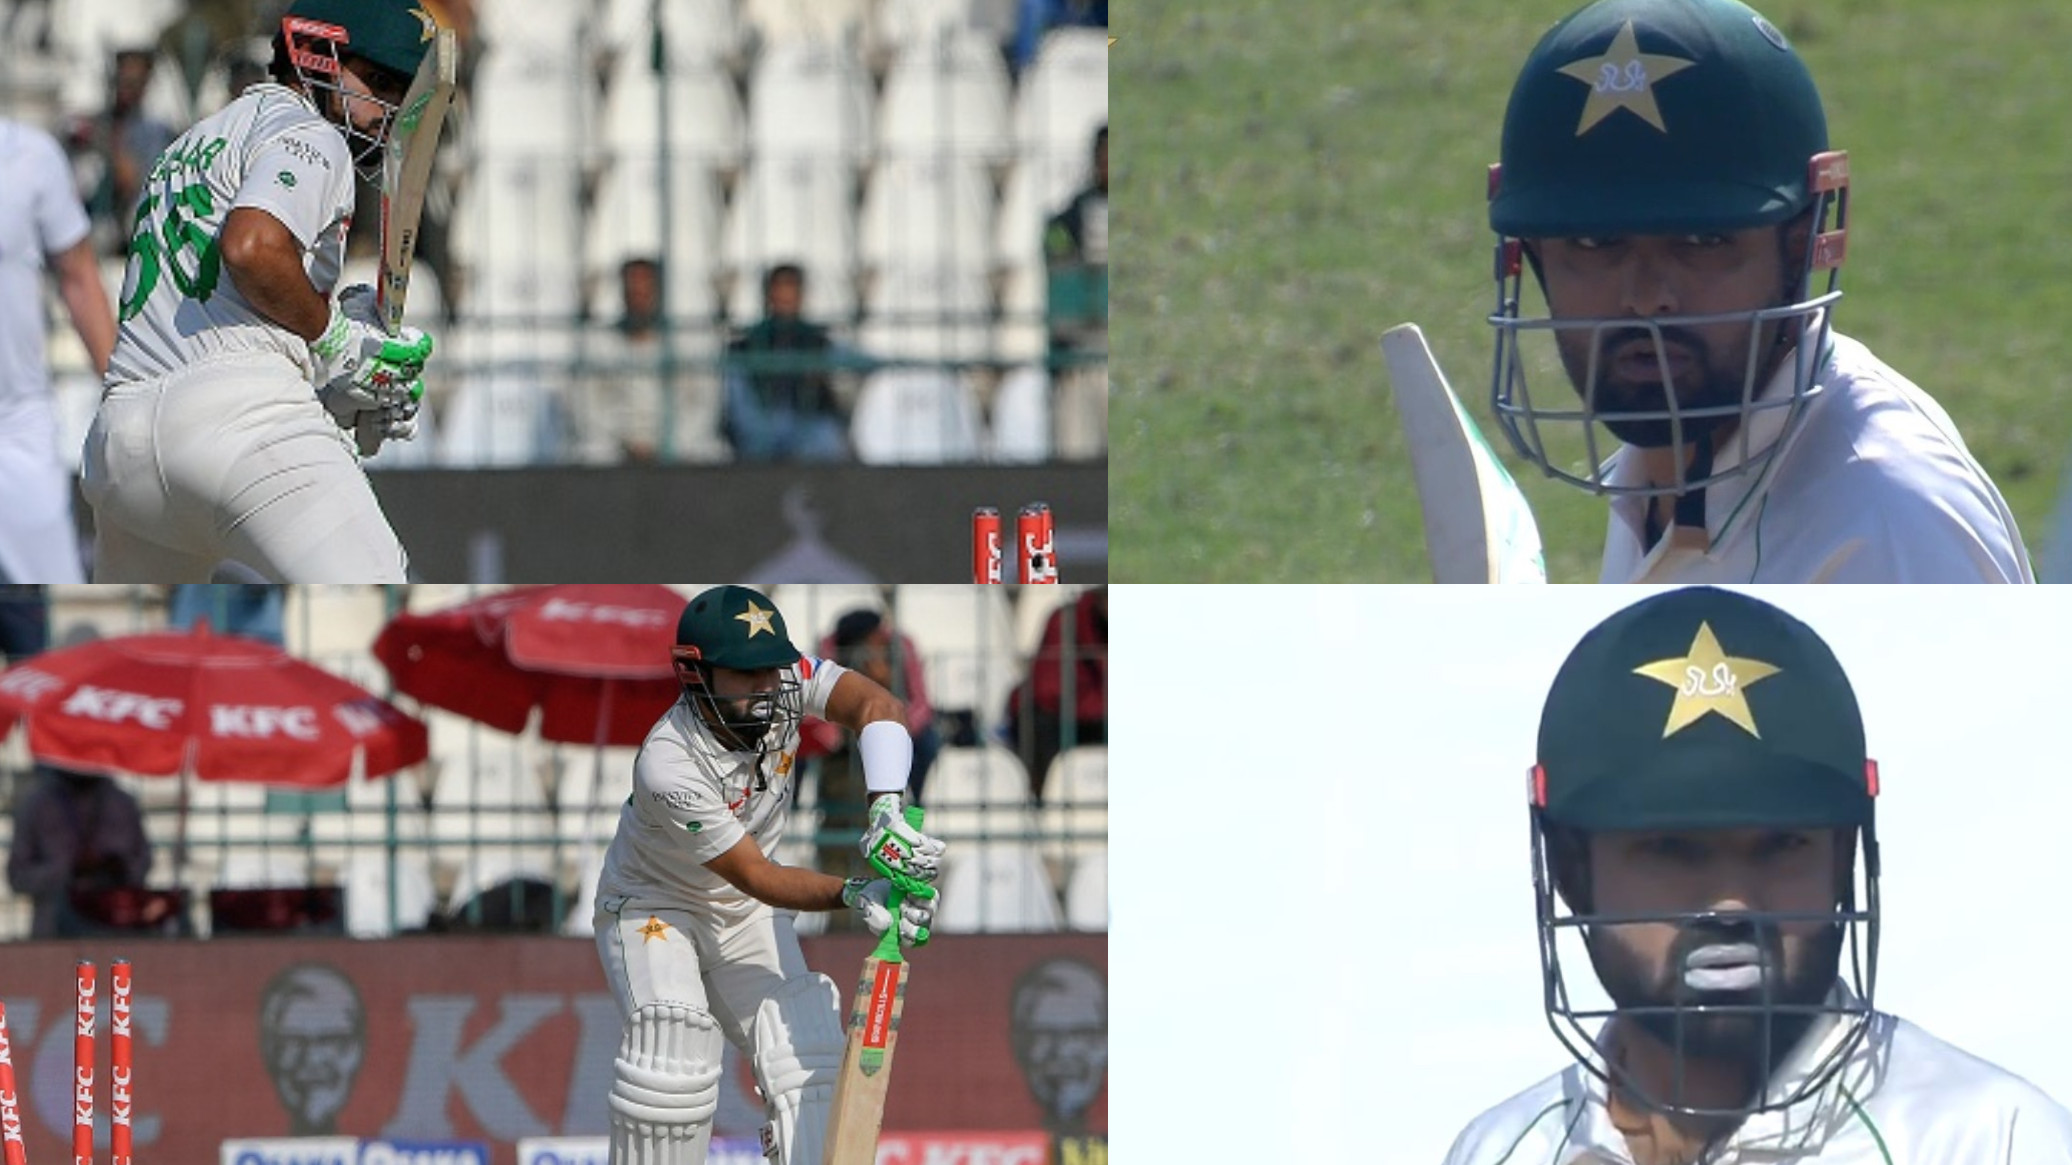 PAK v ENG 2022: WATCH- Babar Azam and Mohammad Rizwan both react with a ‘Kohli face’ after being castled in Multan  